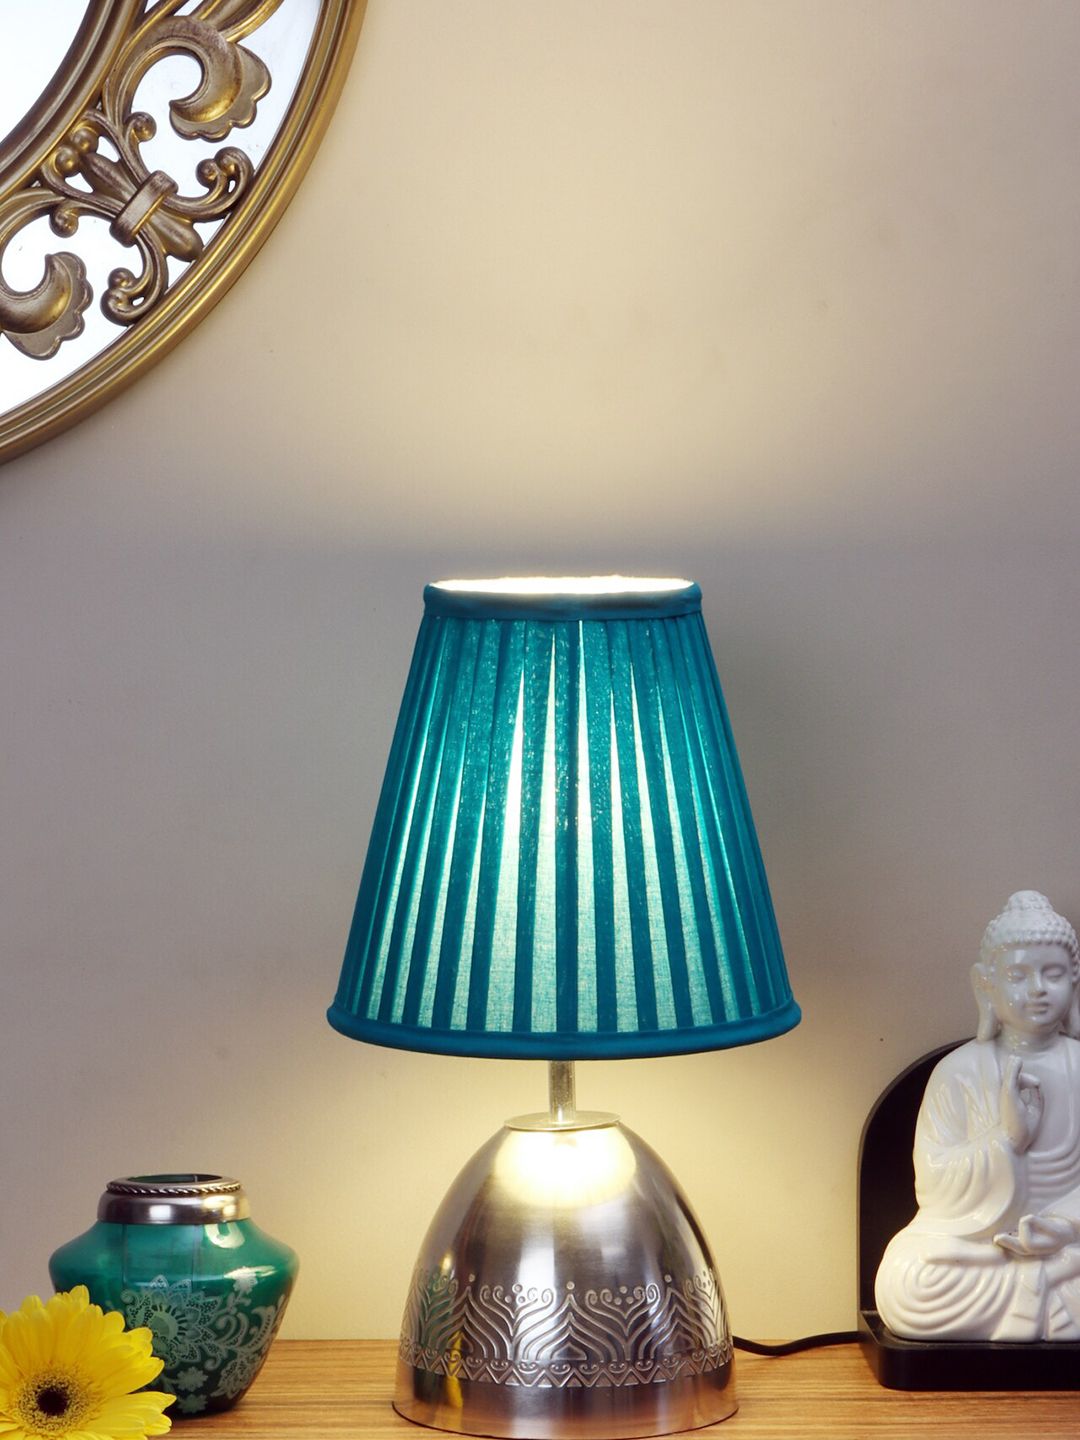 nakshikathaa Utsav Silver-Plated Teal Table Lamp with Pleated Shade Price in India